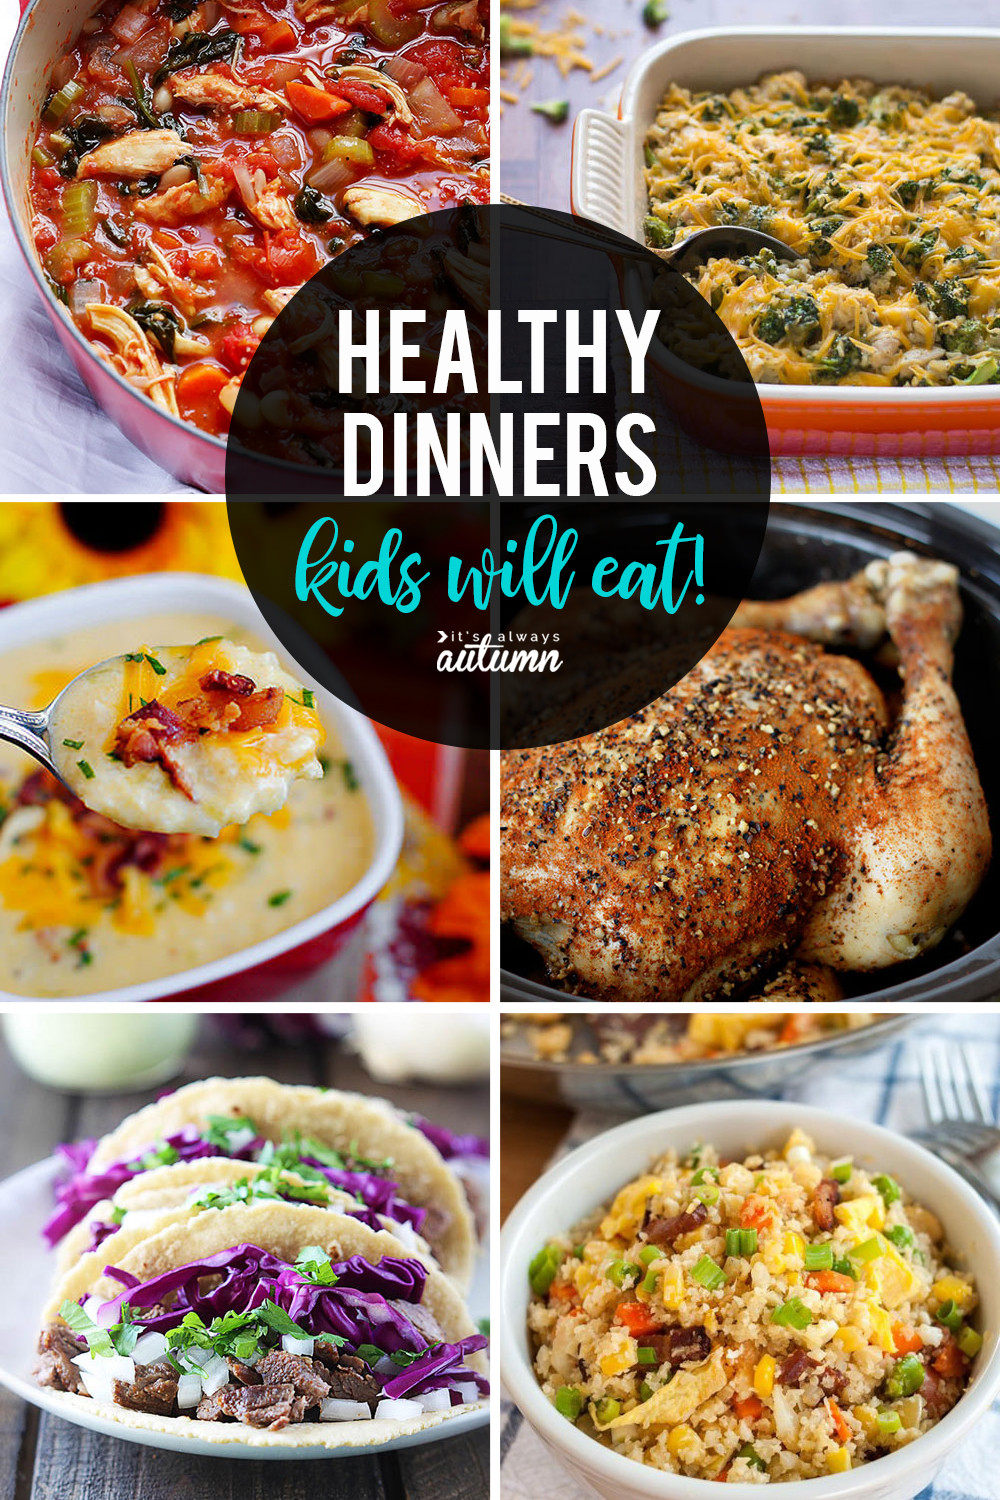 Dinners For Kids
 20 healthy easy recipes your kids will actually want to